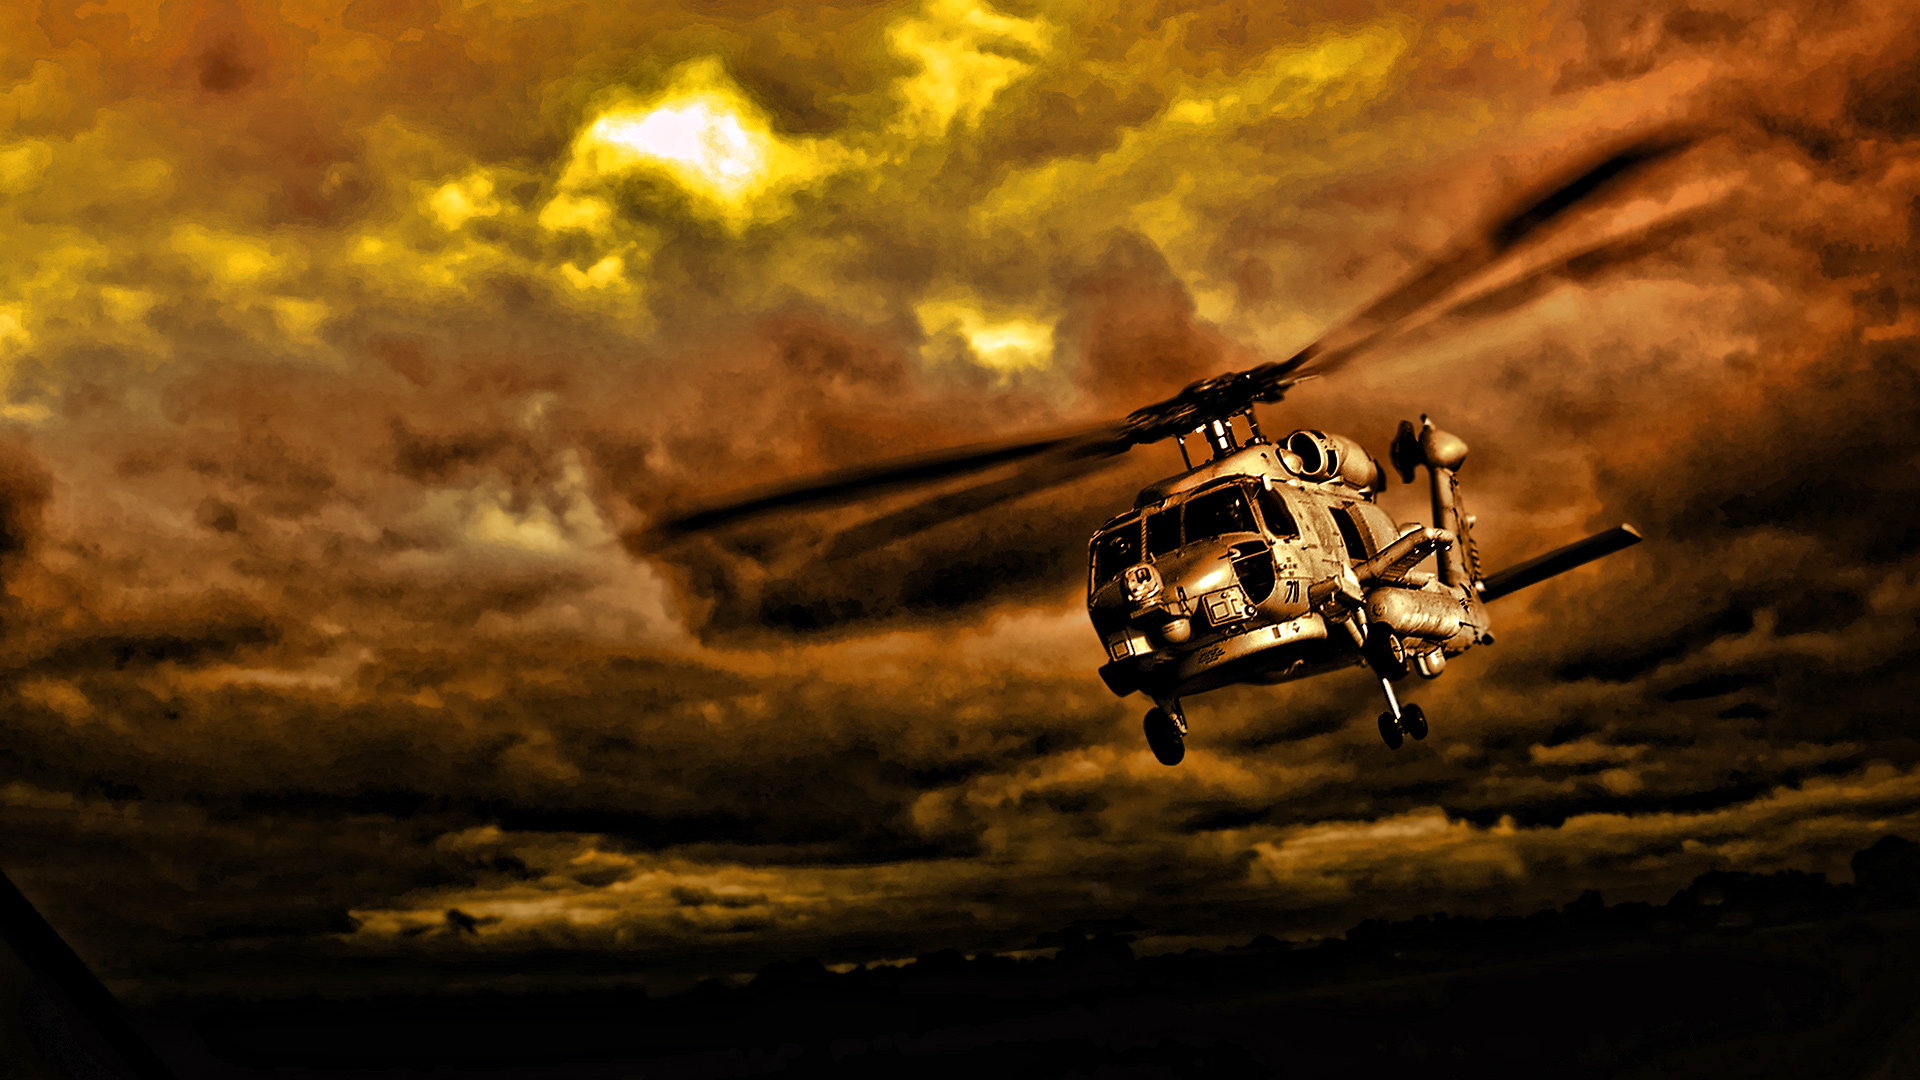 Helicopter Wallpaper High Quality Idiot Dollar